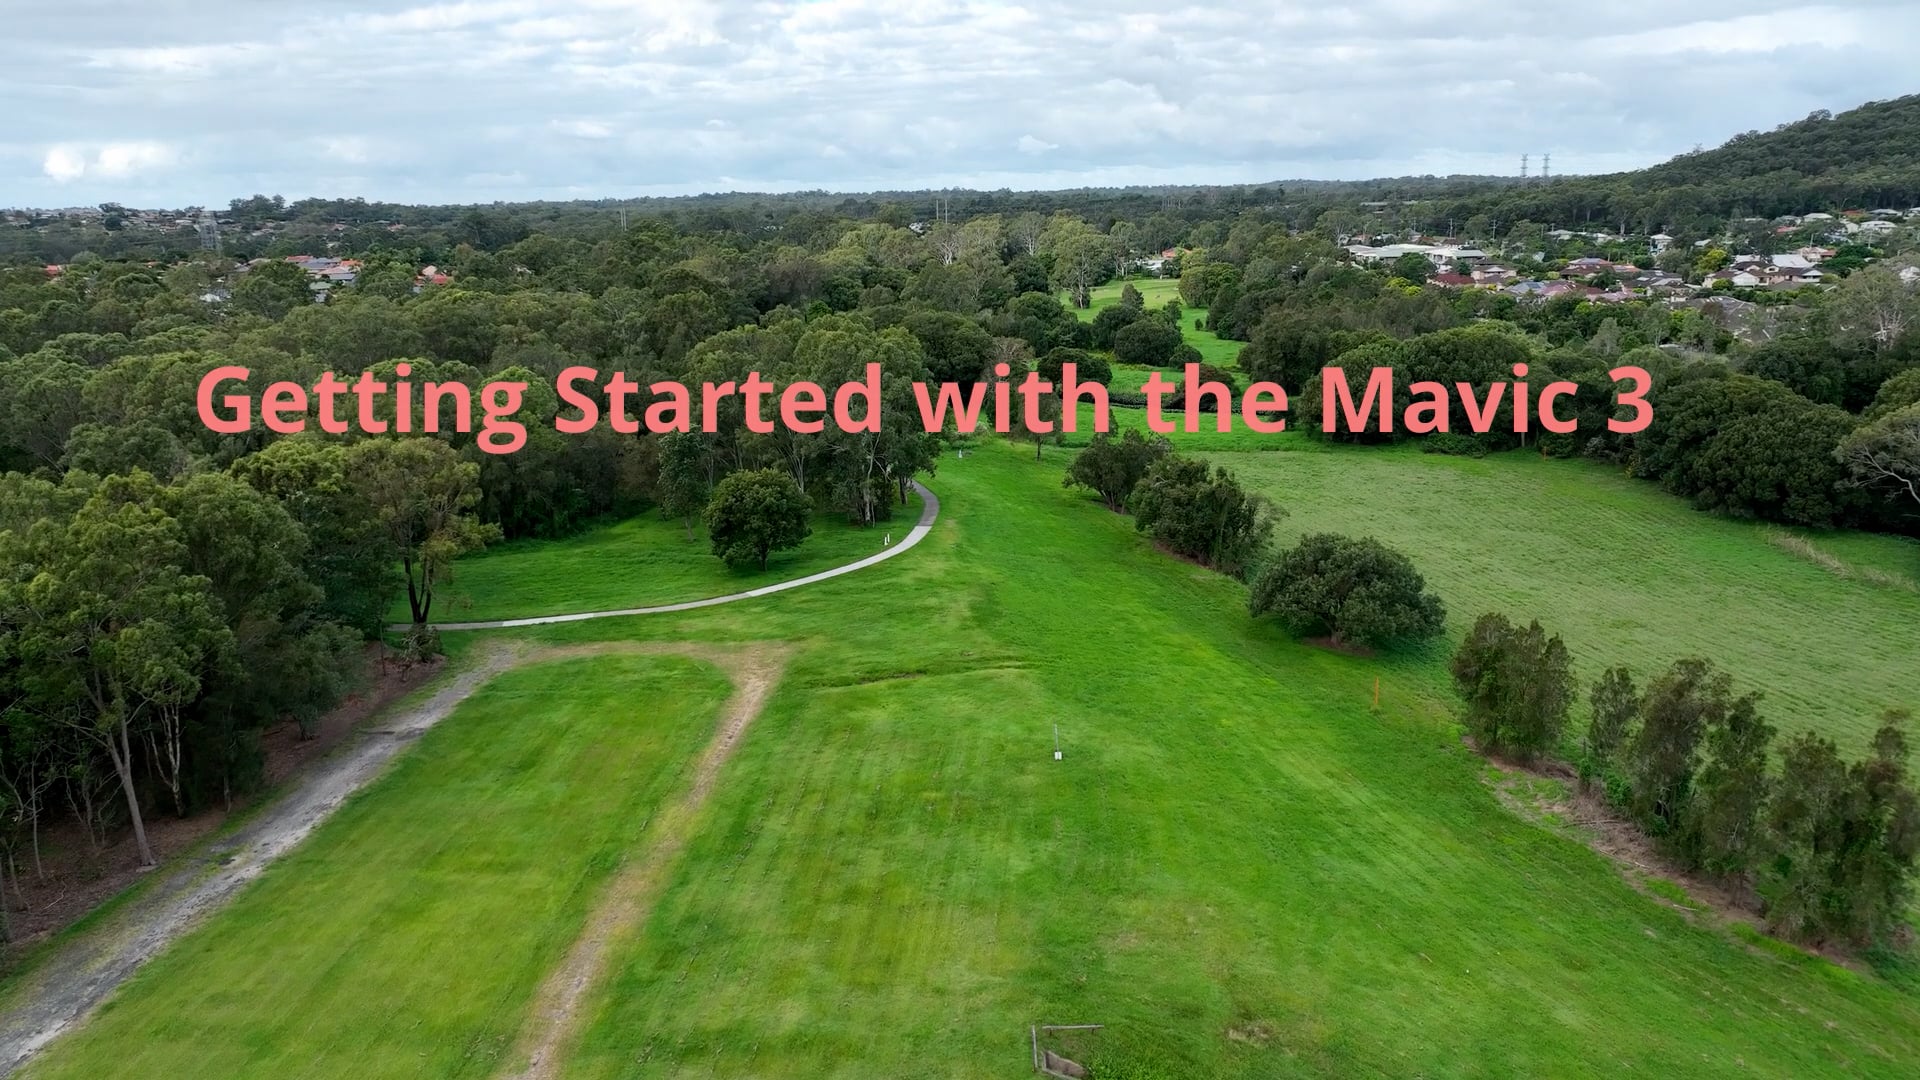 Getting started with Mavic 3